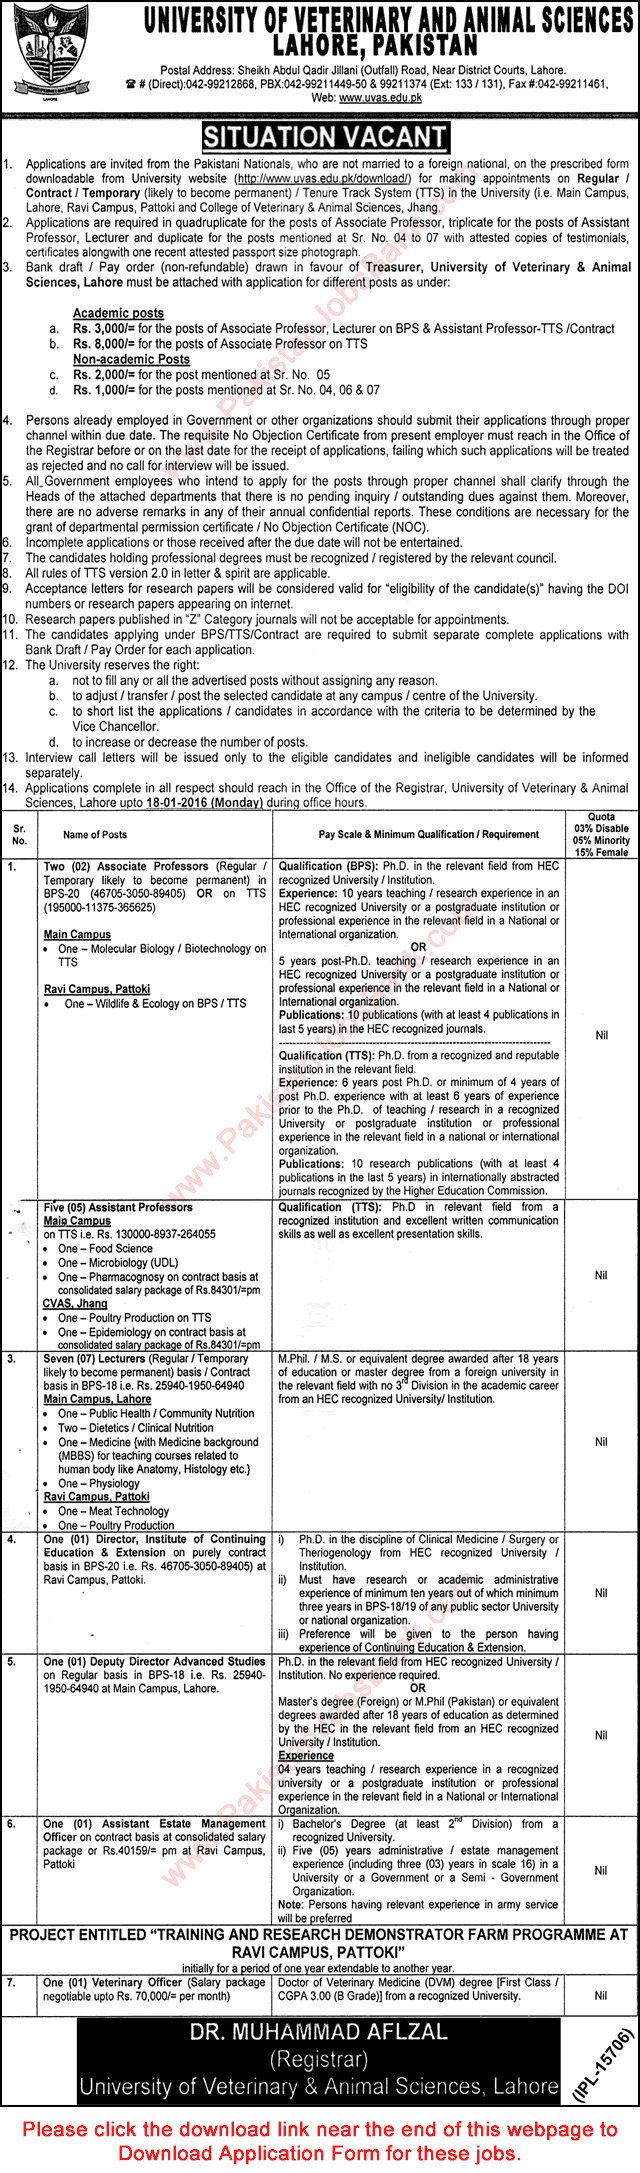 University of Veterinary and Animal Sciences Lahore Jobs December 2015 / 2016 UVAS Application Form Download Latest